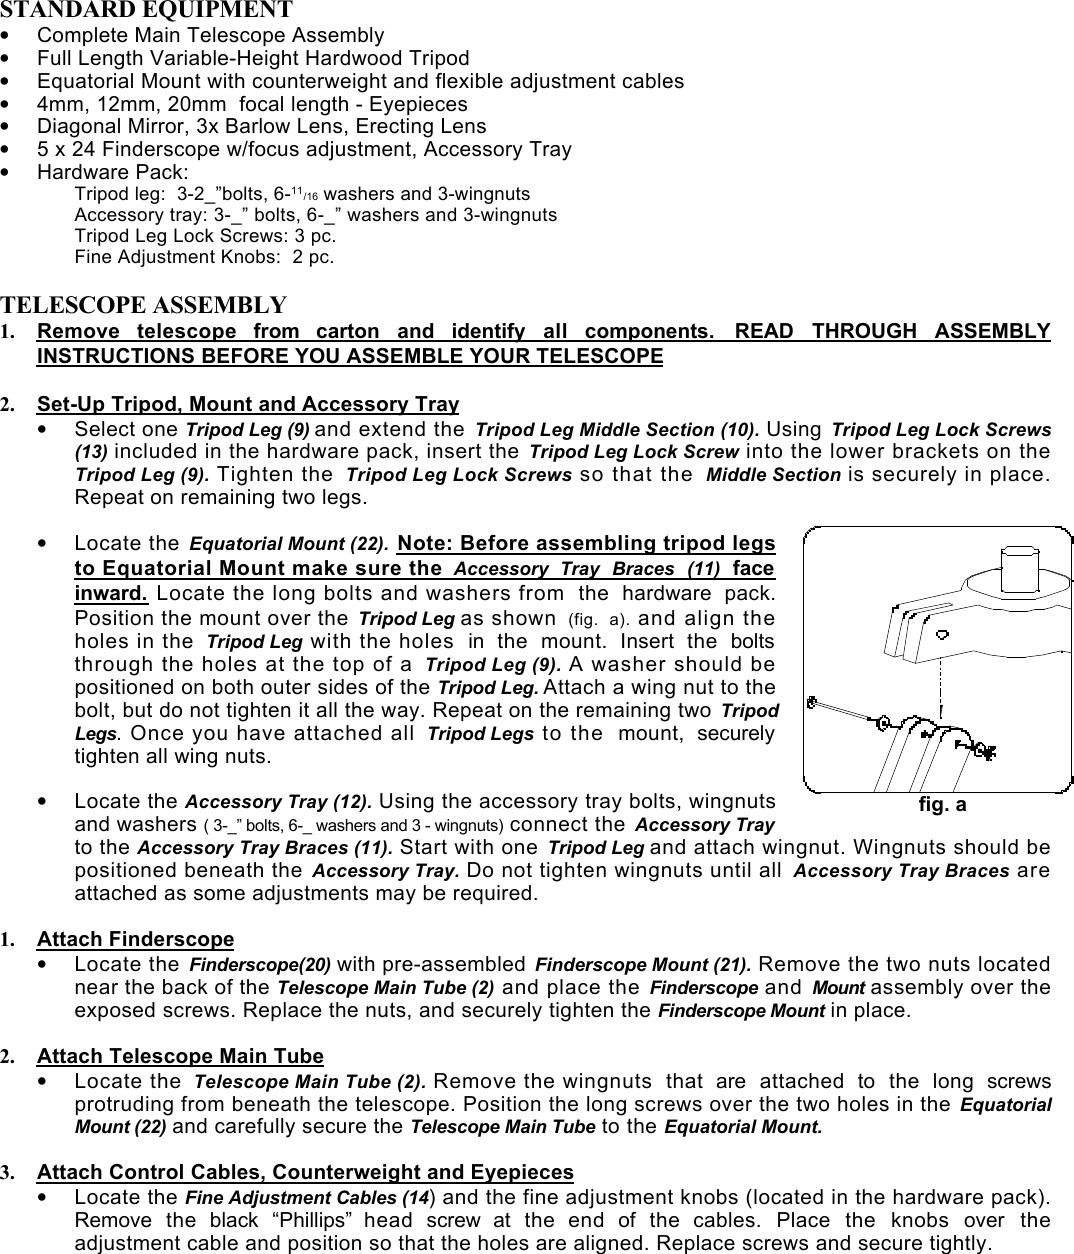 Page 2 of 5 - Bushnell Bushnell-Deep-Space-Series-78-9519-Users-Manual-  Bushnell-deep-space-series-78-9519-users-manual